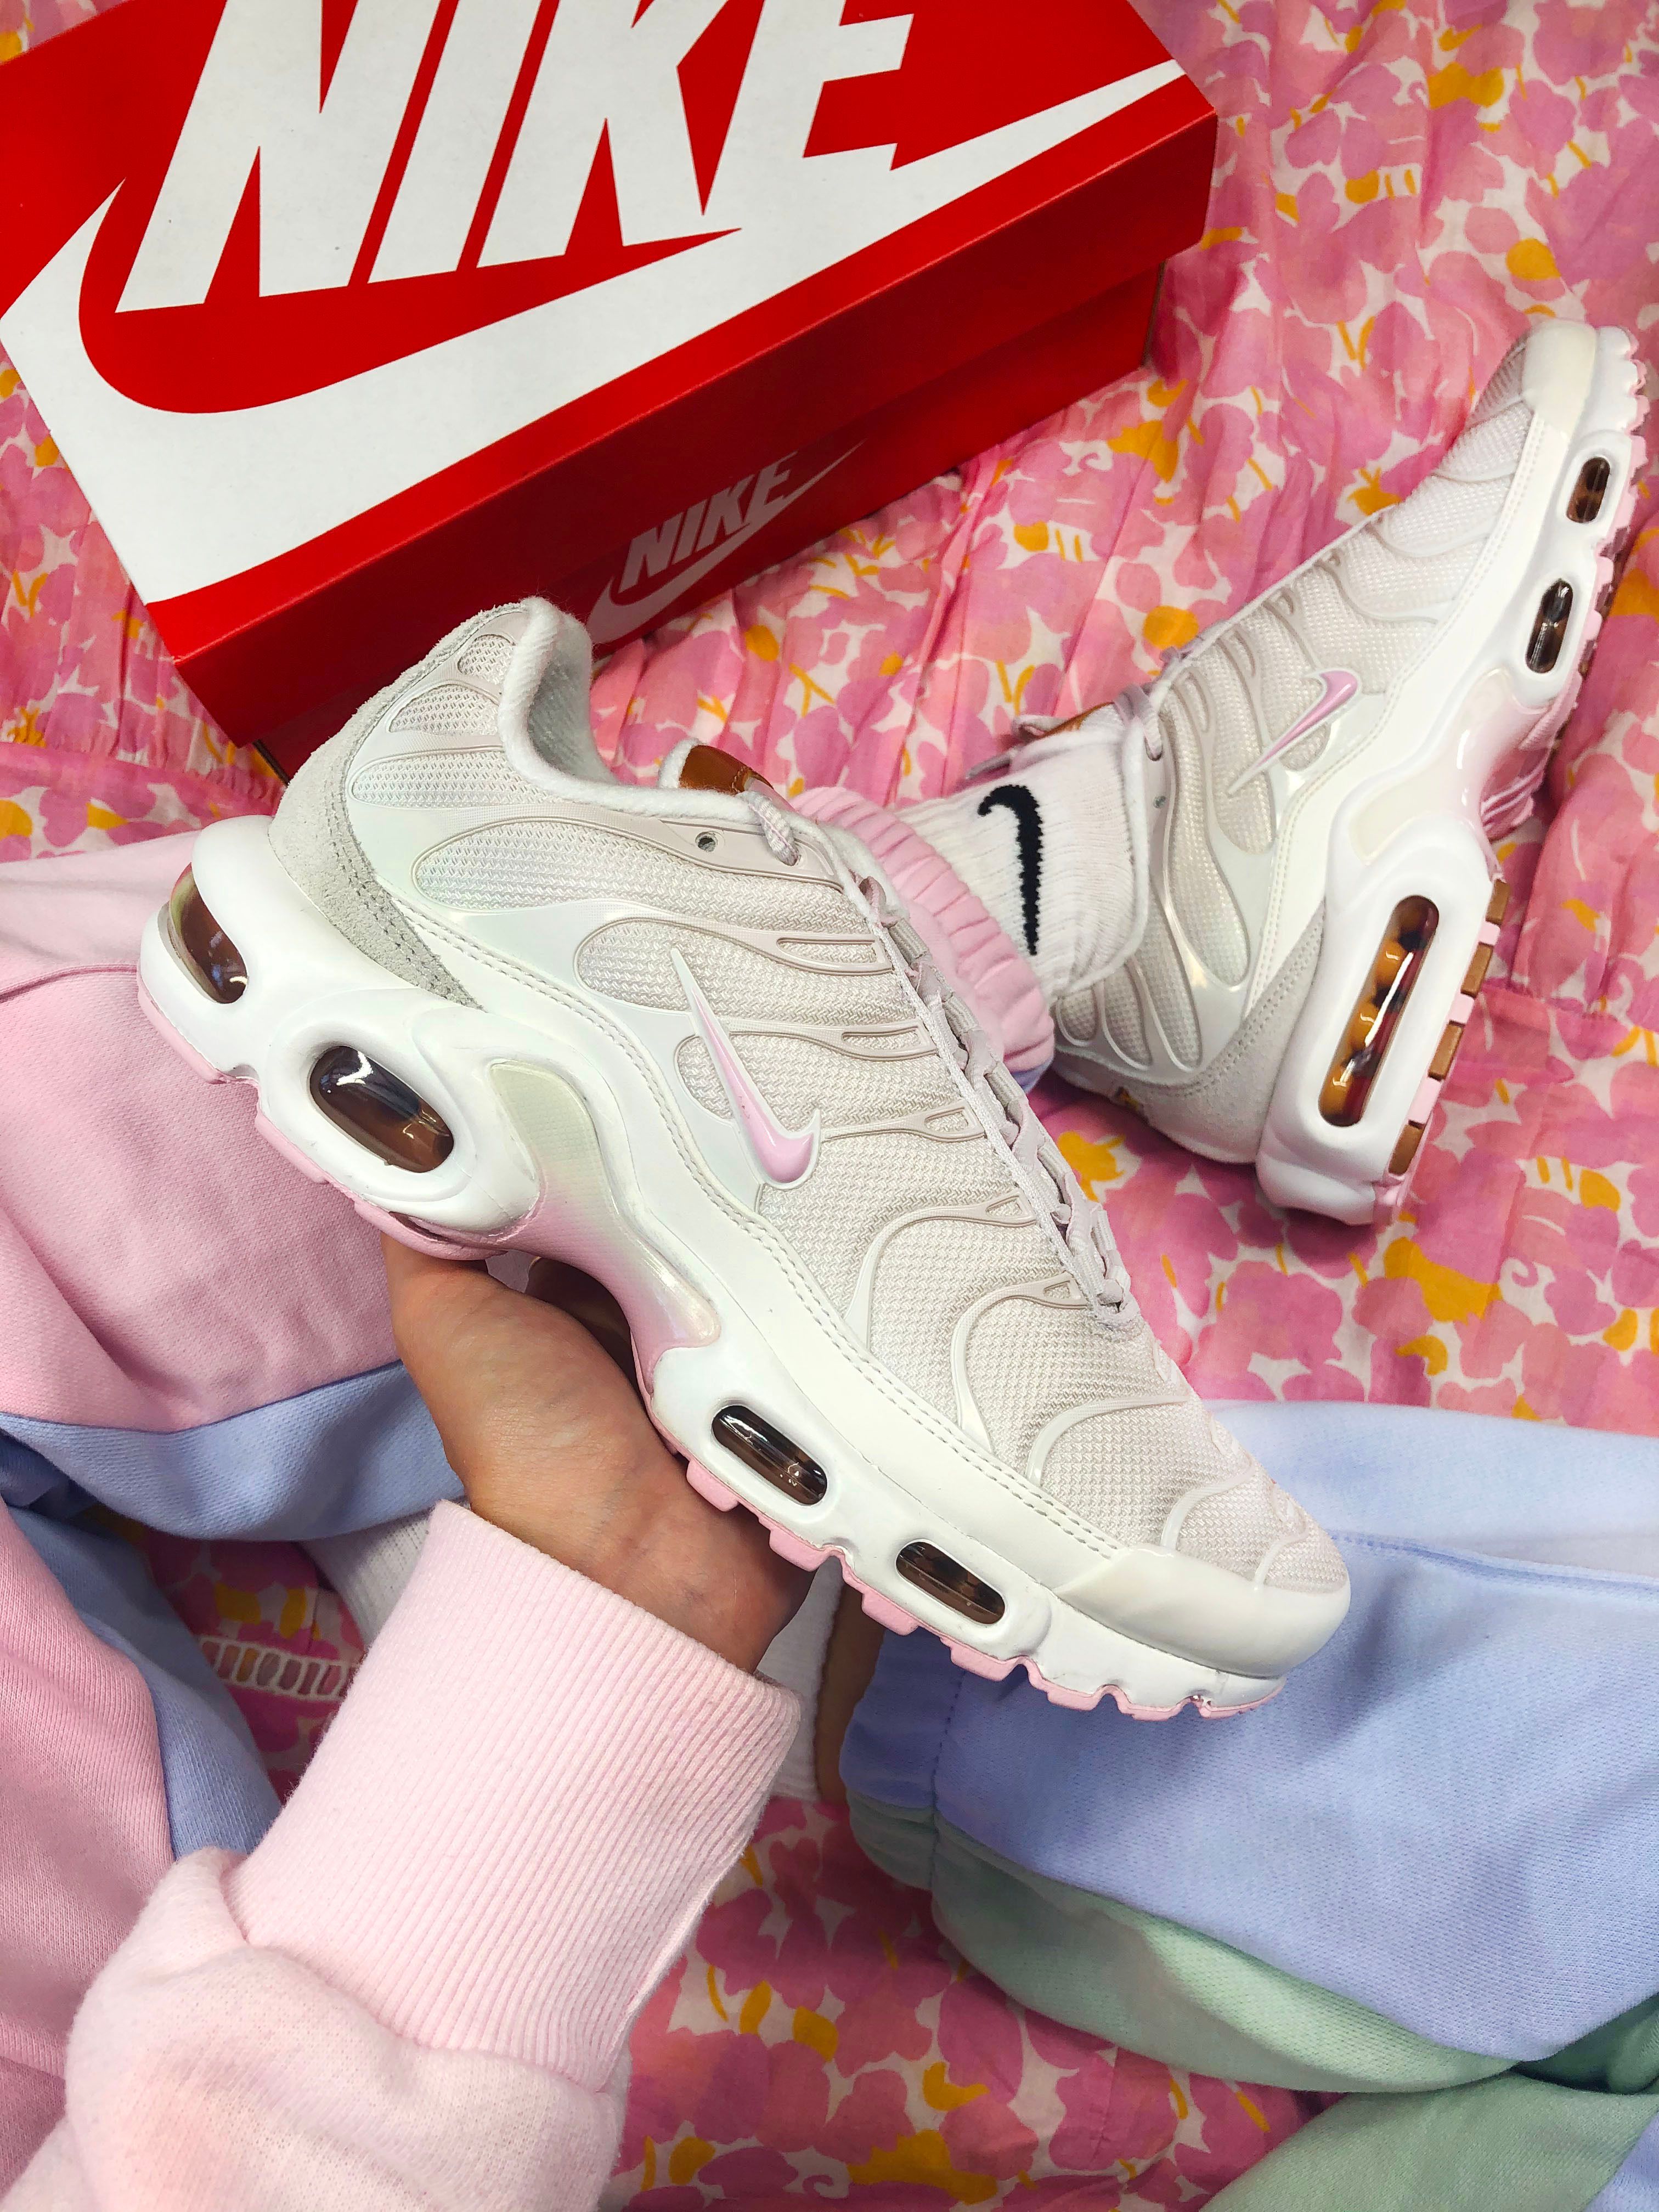 The Sole Womens on Twitter: "UNDER £100 in the Foot Locker sale... miss on your chance to cop this cute Nike Air Max TN Plus £40 this ✔️